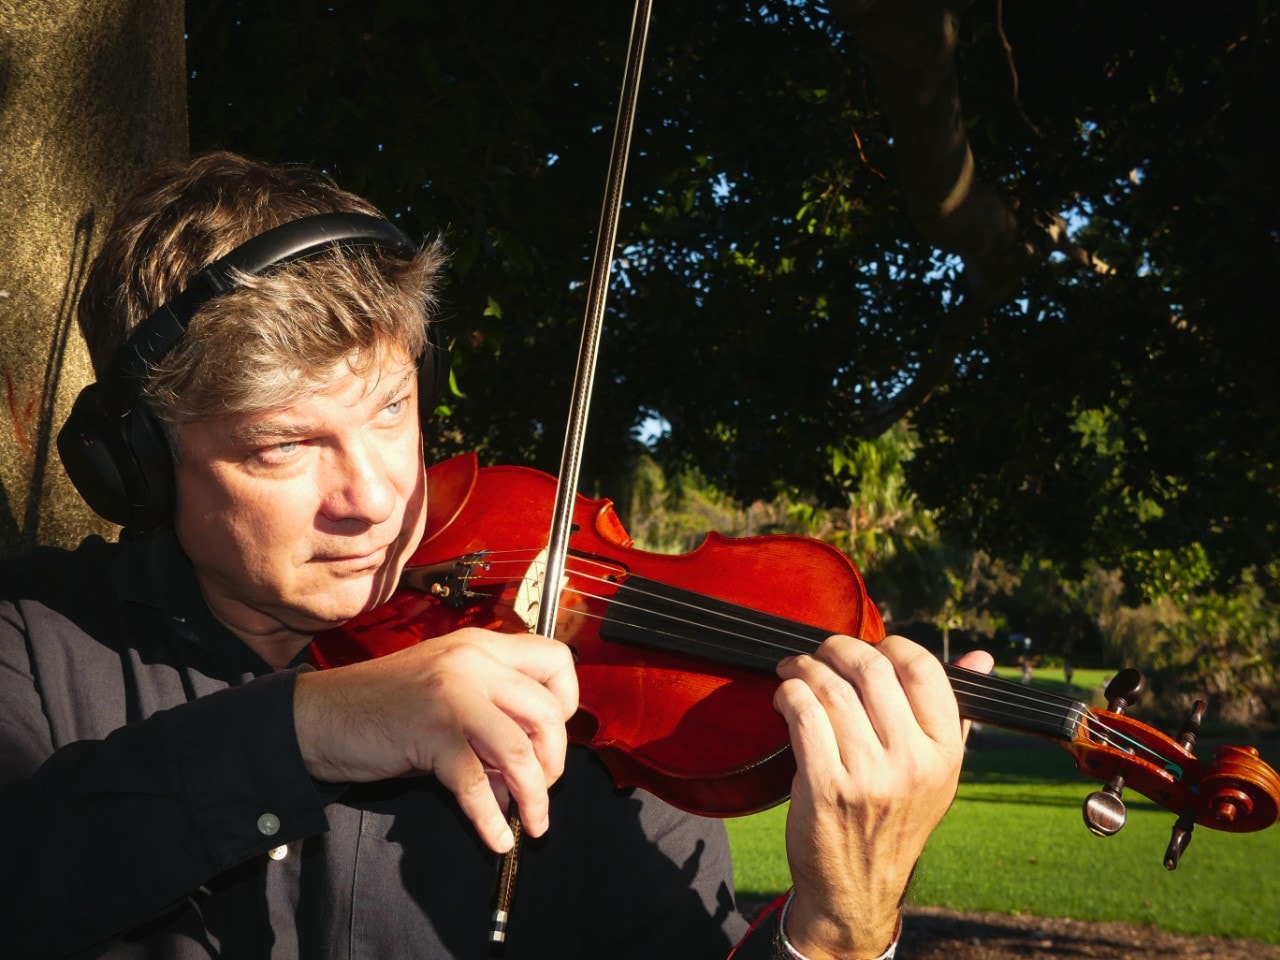 man playing a violin with headphones on